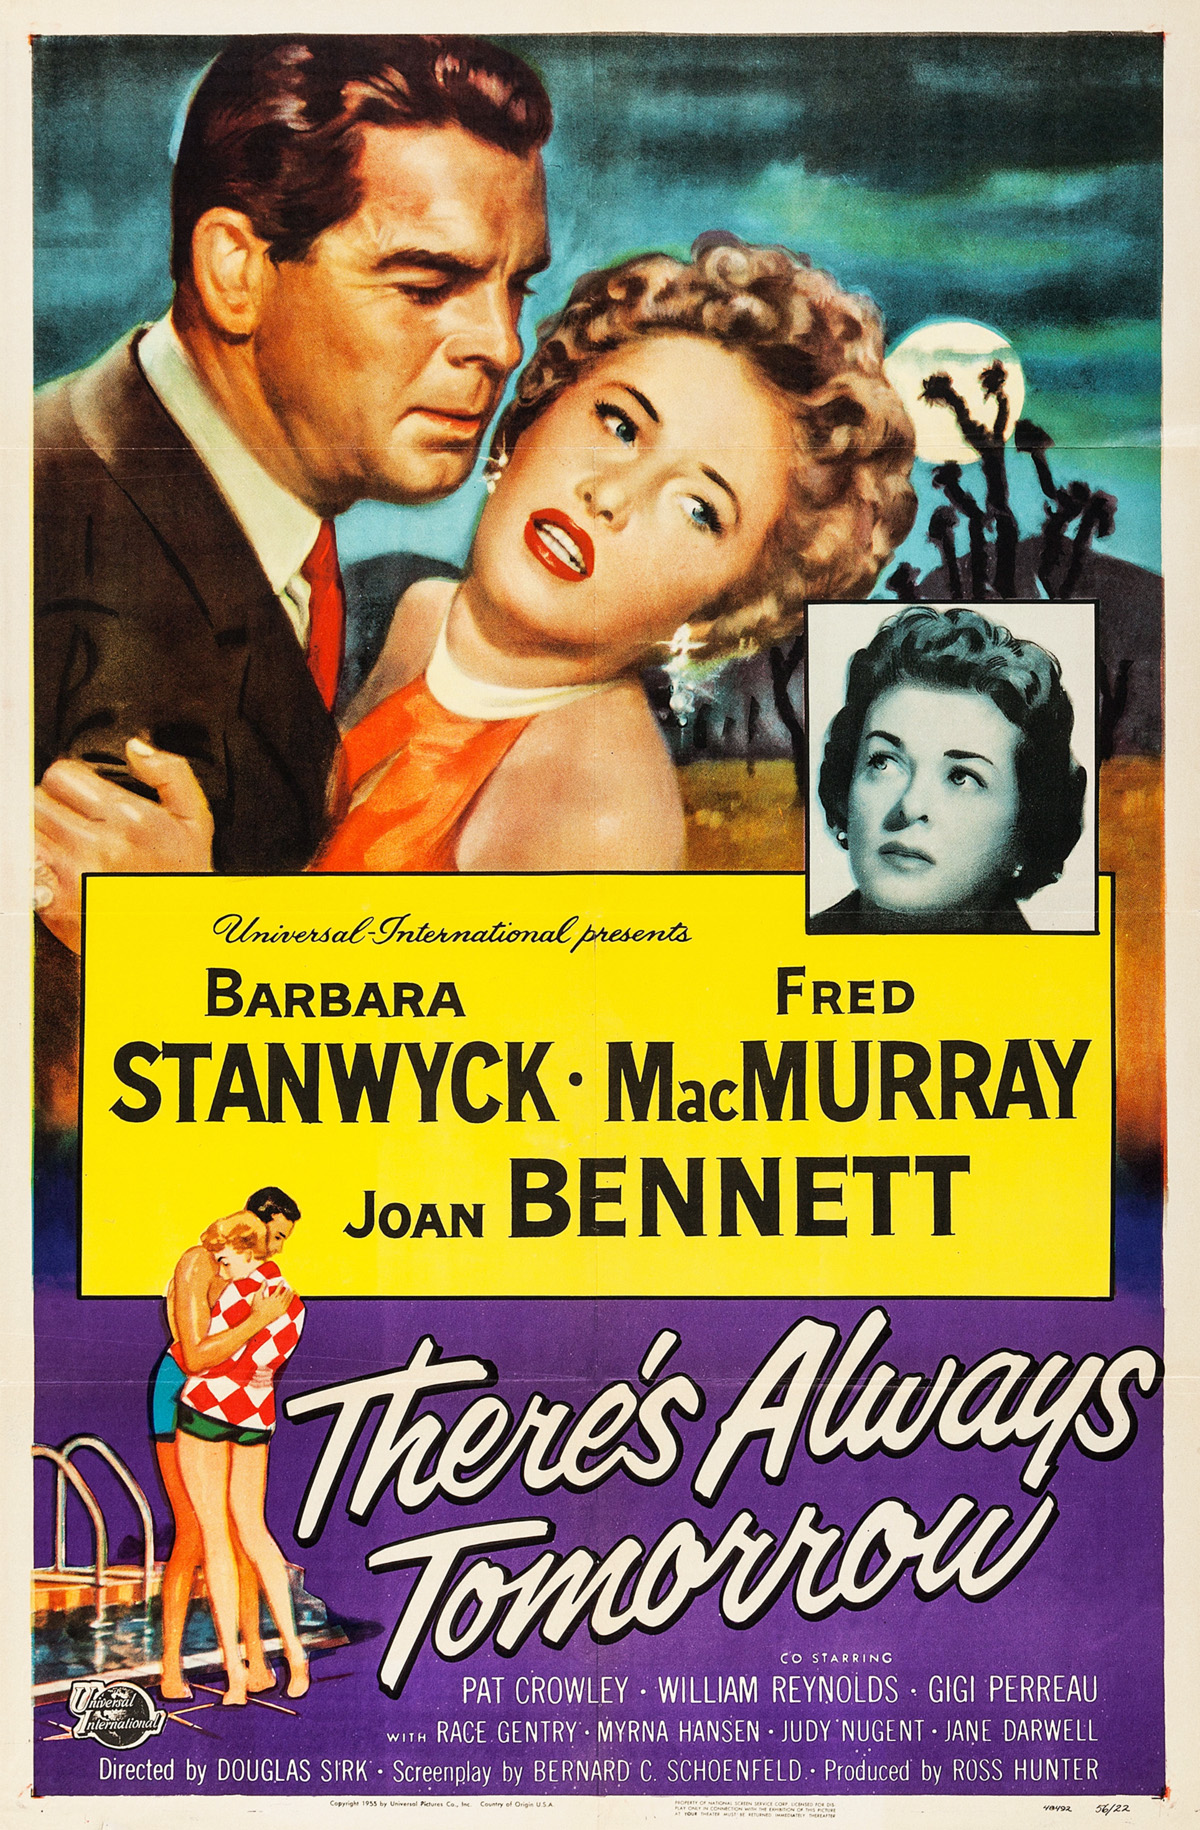 THERE'S ALWAYS TOMORROW (1956)